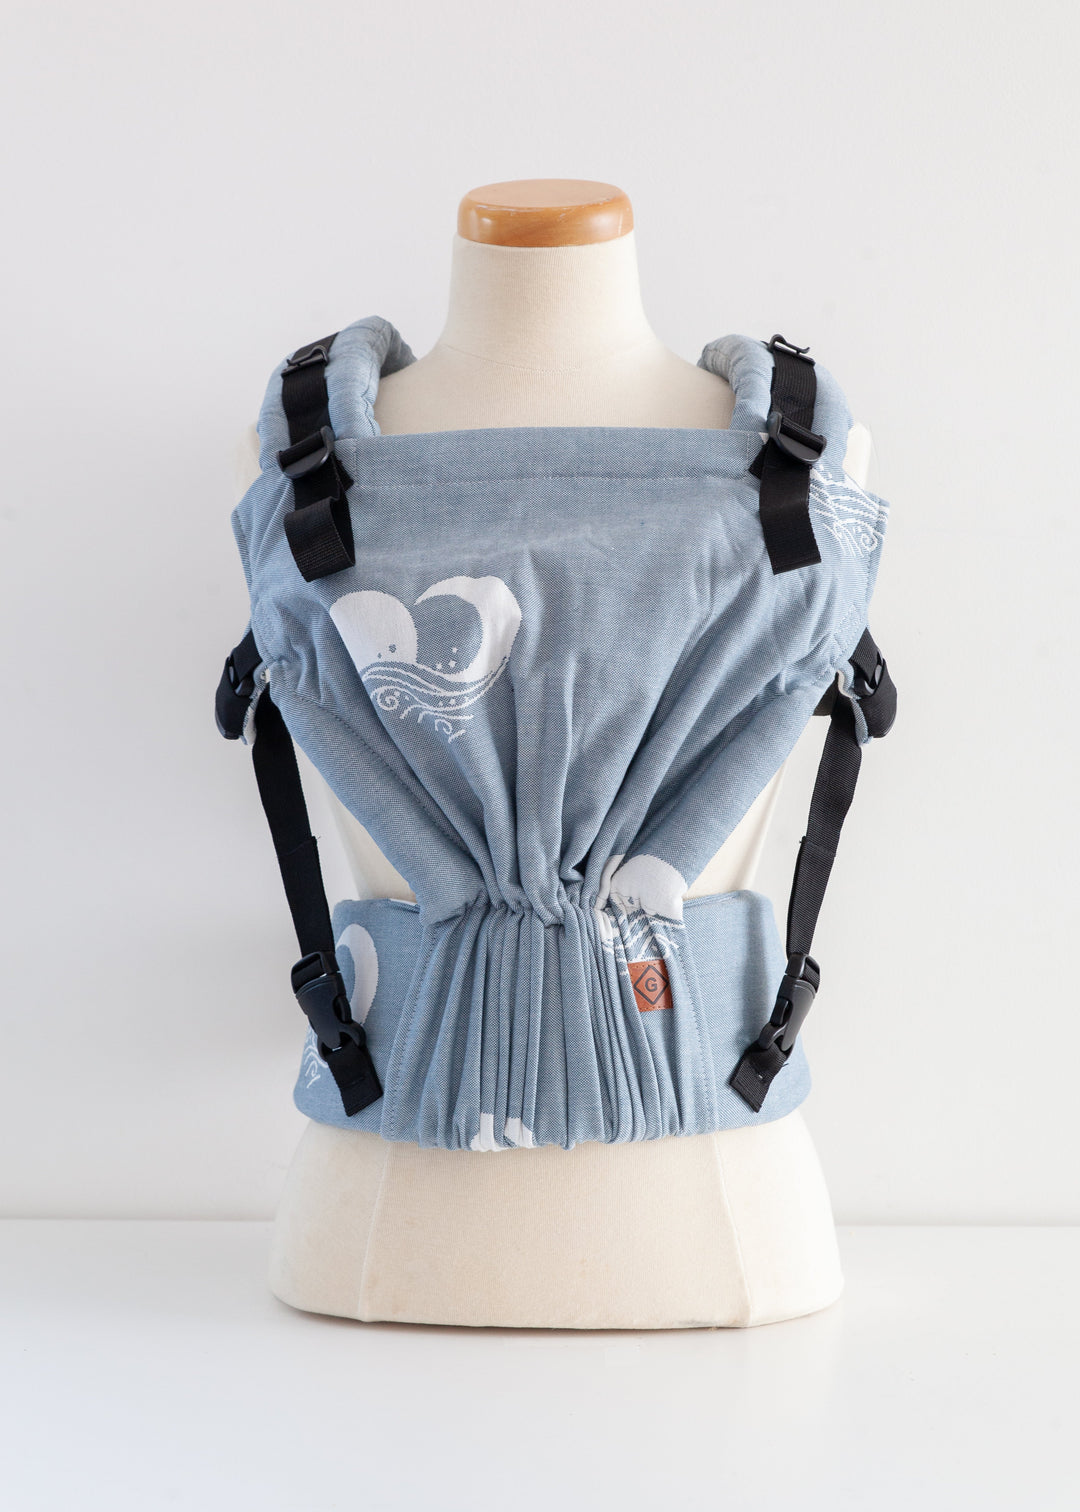 Baby carrier | Patterned | Blue sky